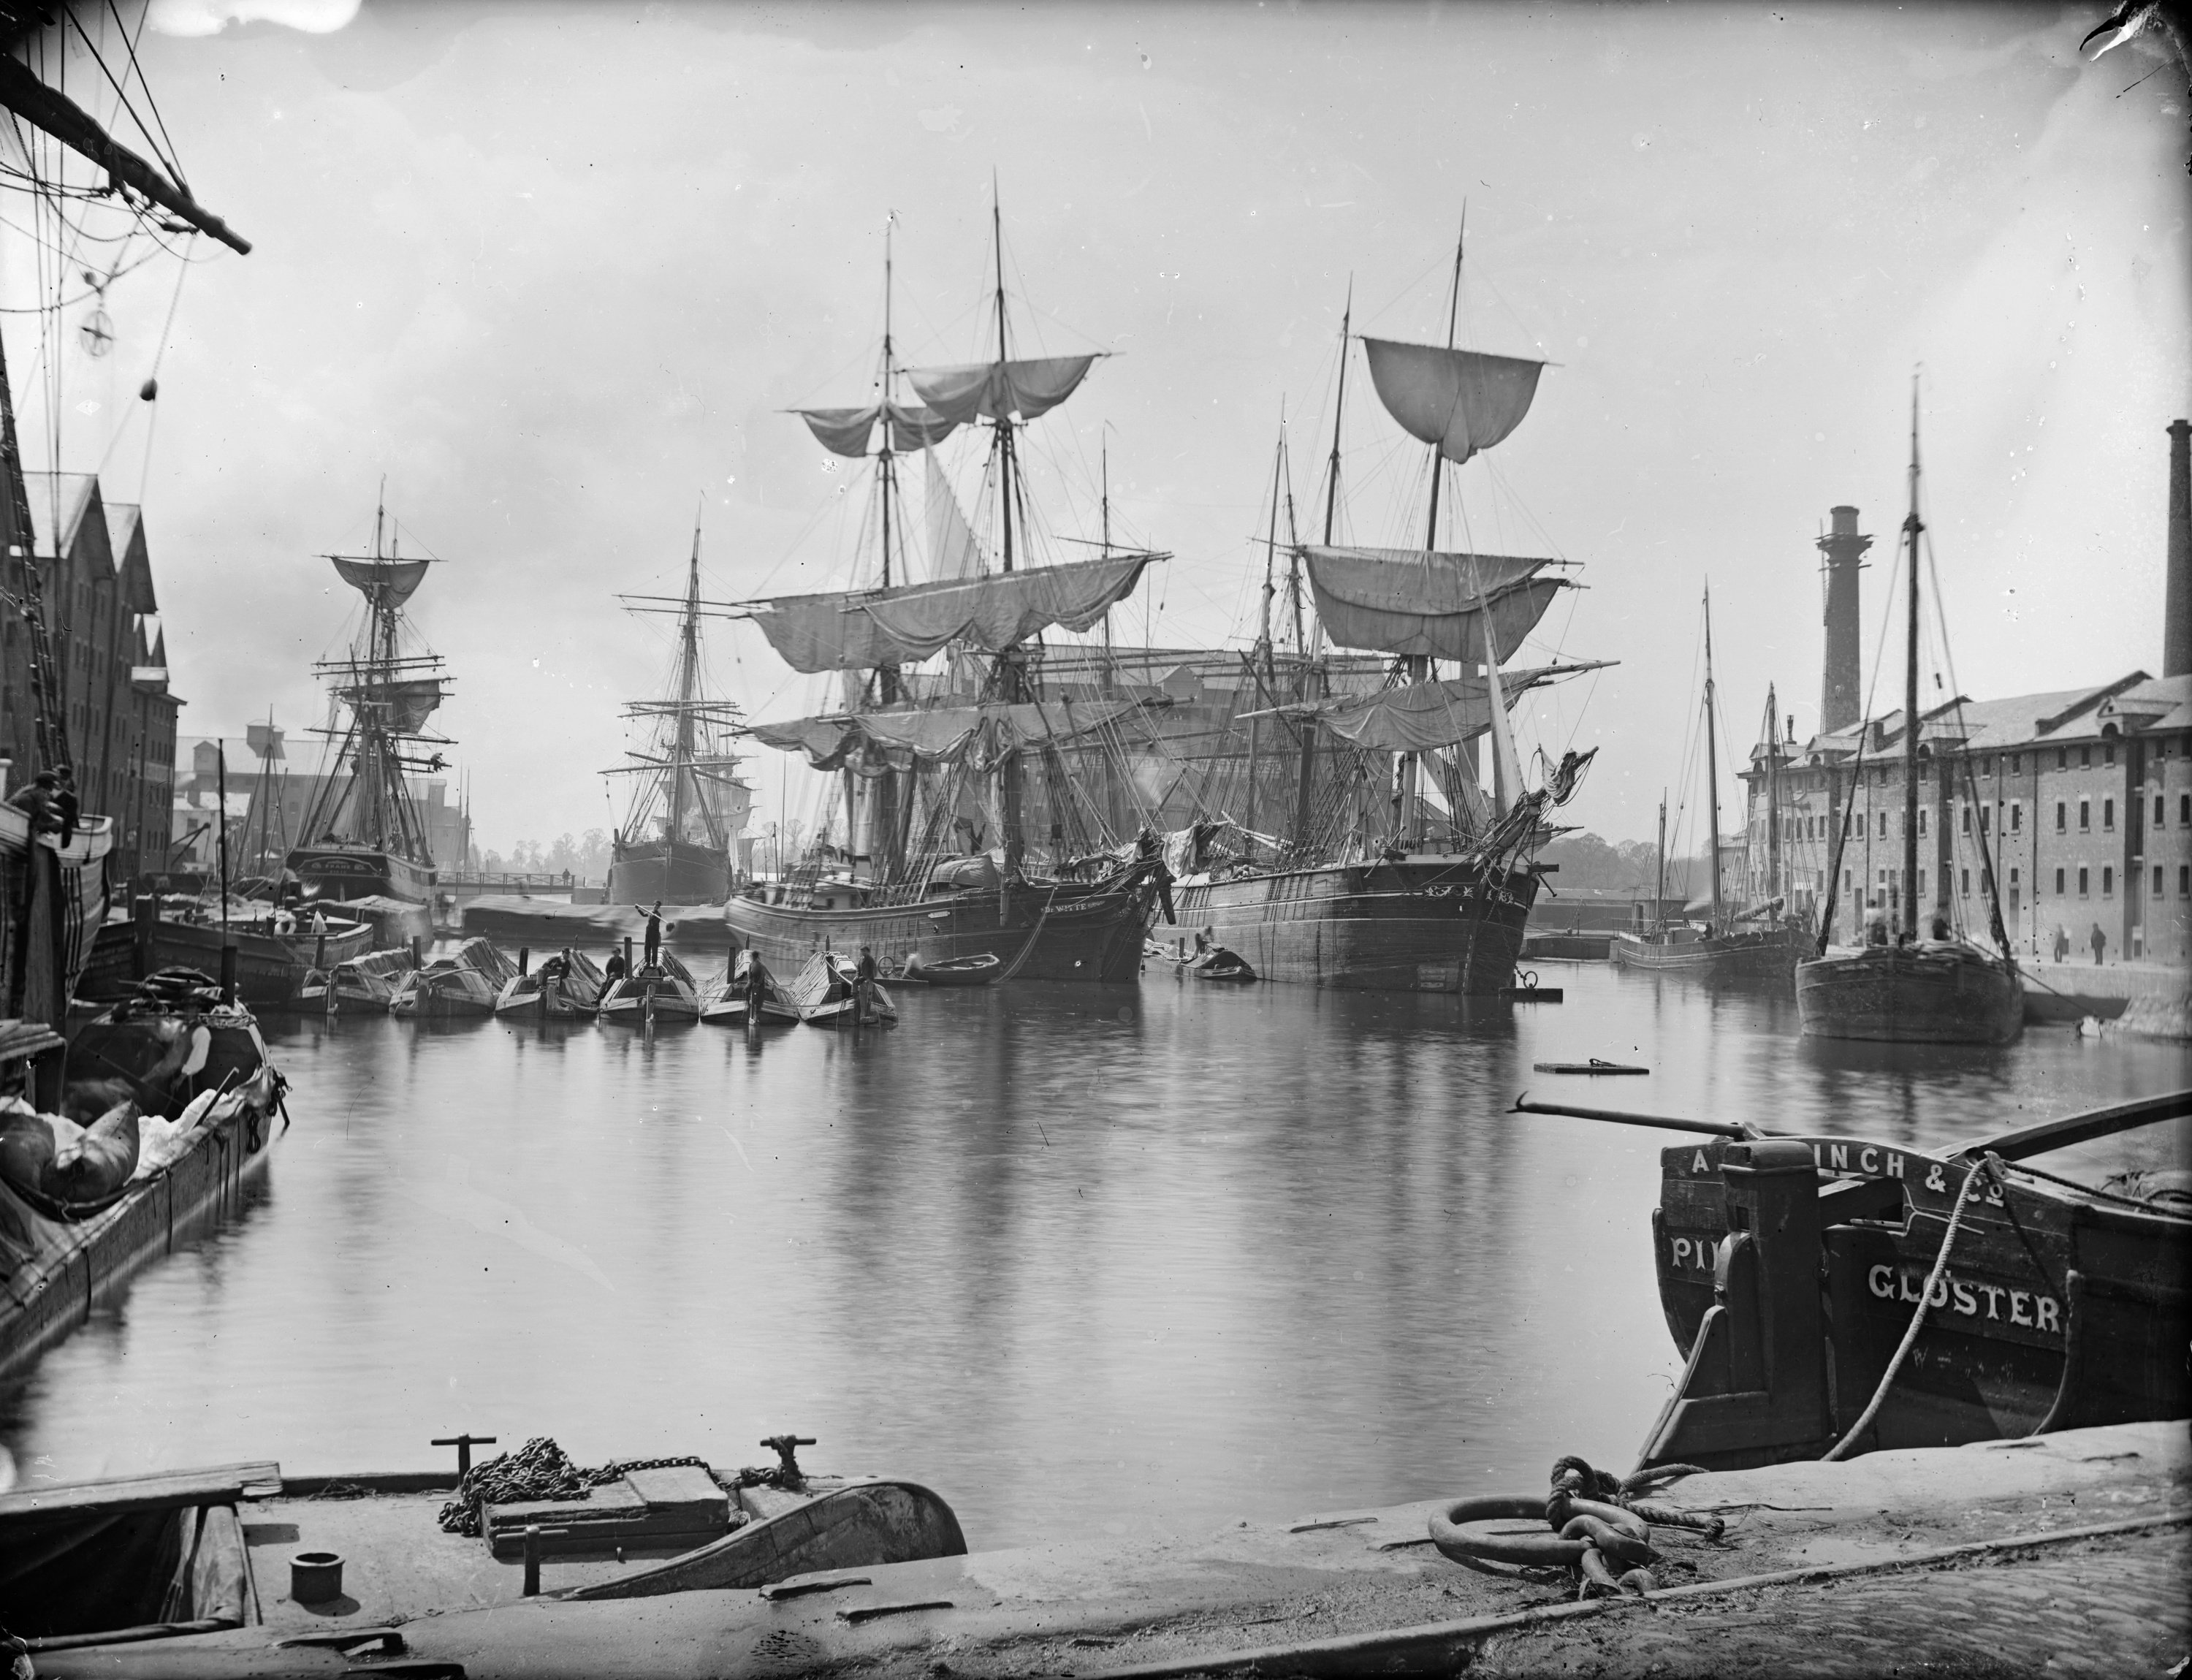 General view showing sailing ships at Gloucester Docks, Gloucester. Date: 1880-1900